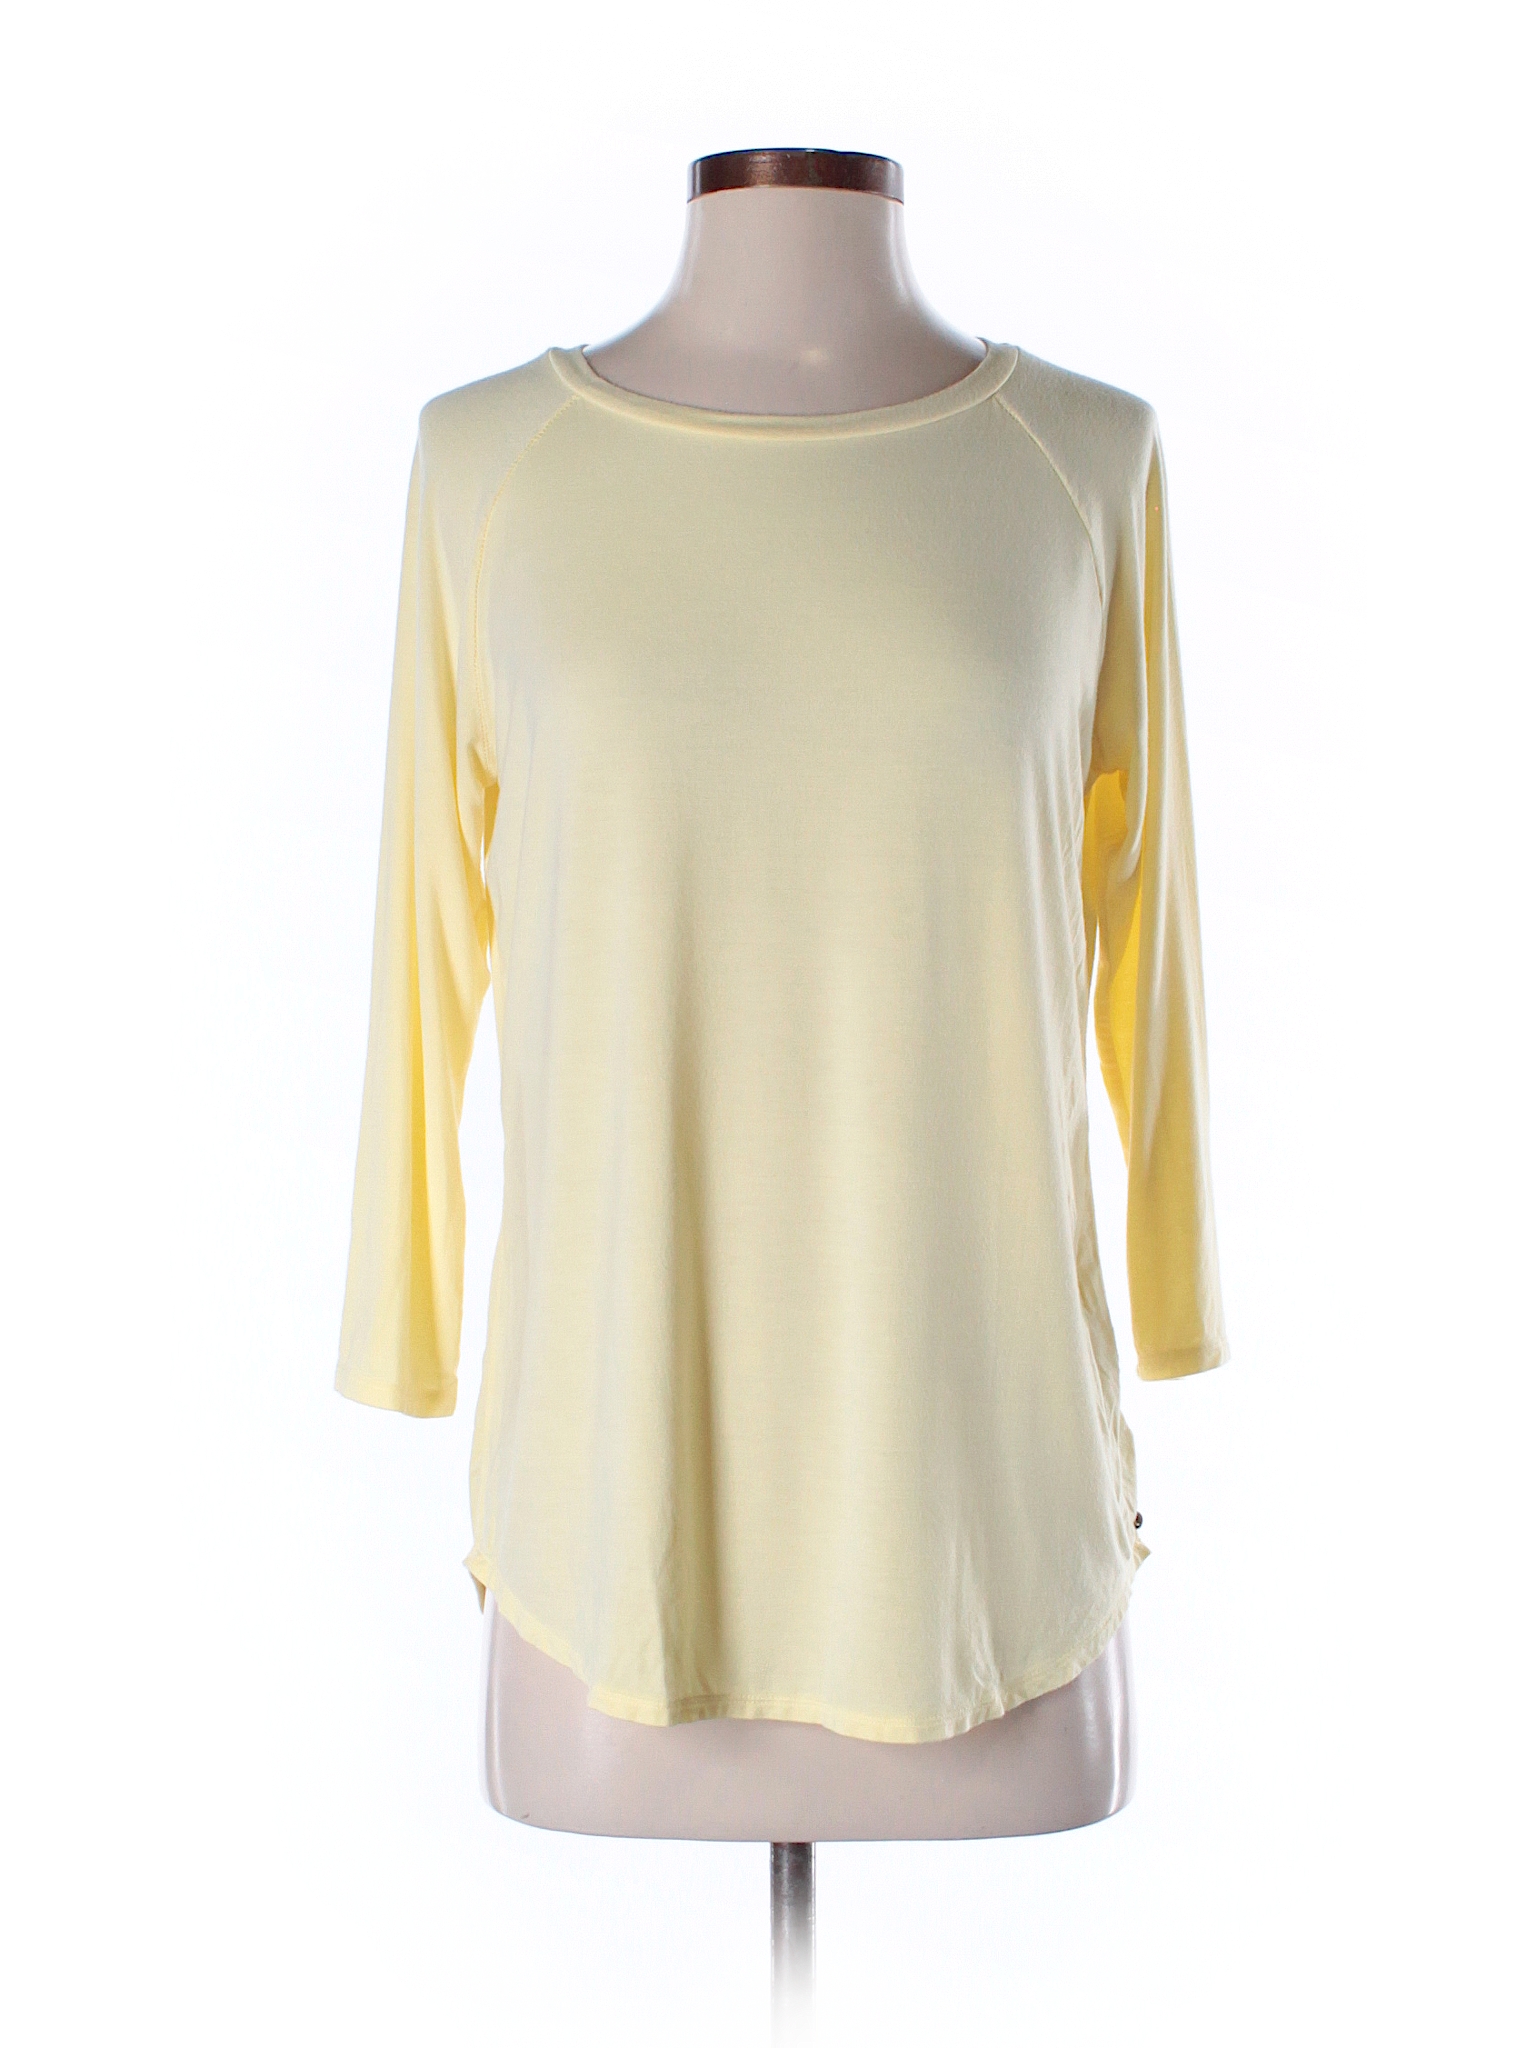 American Eagle Outfitters Solid Yellow 3/4 Sleeve T-Shirt Size M - 56% ...